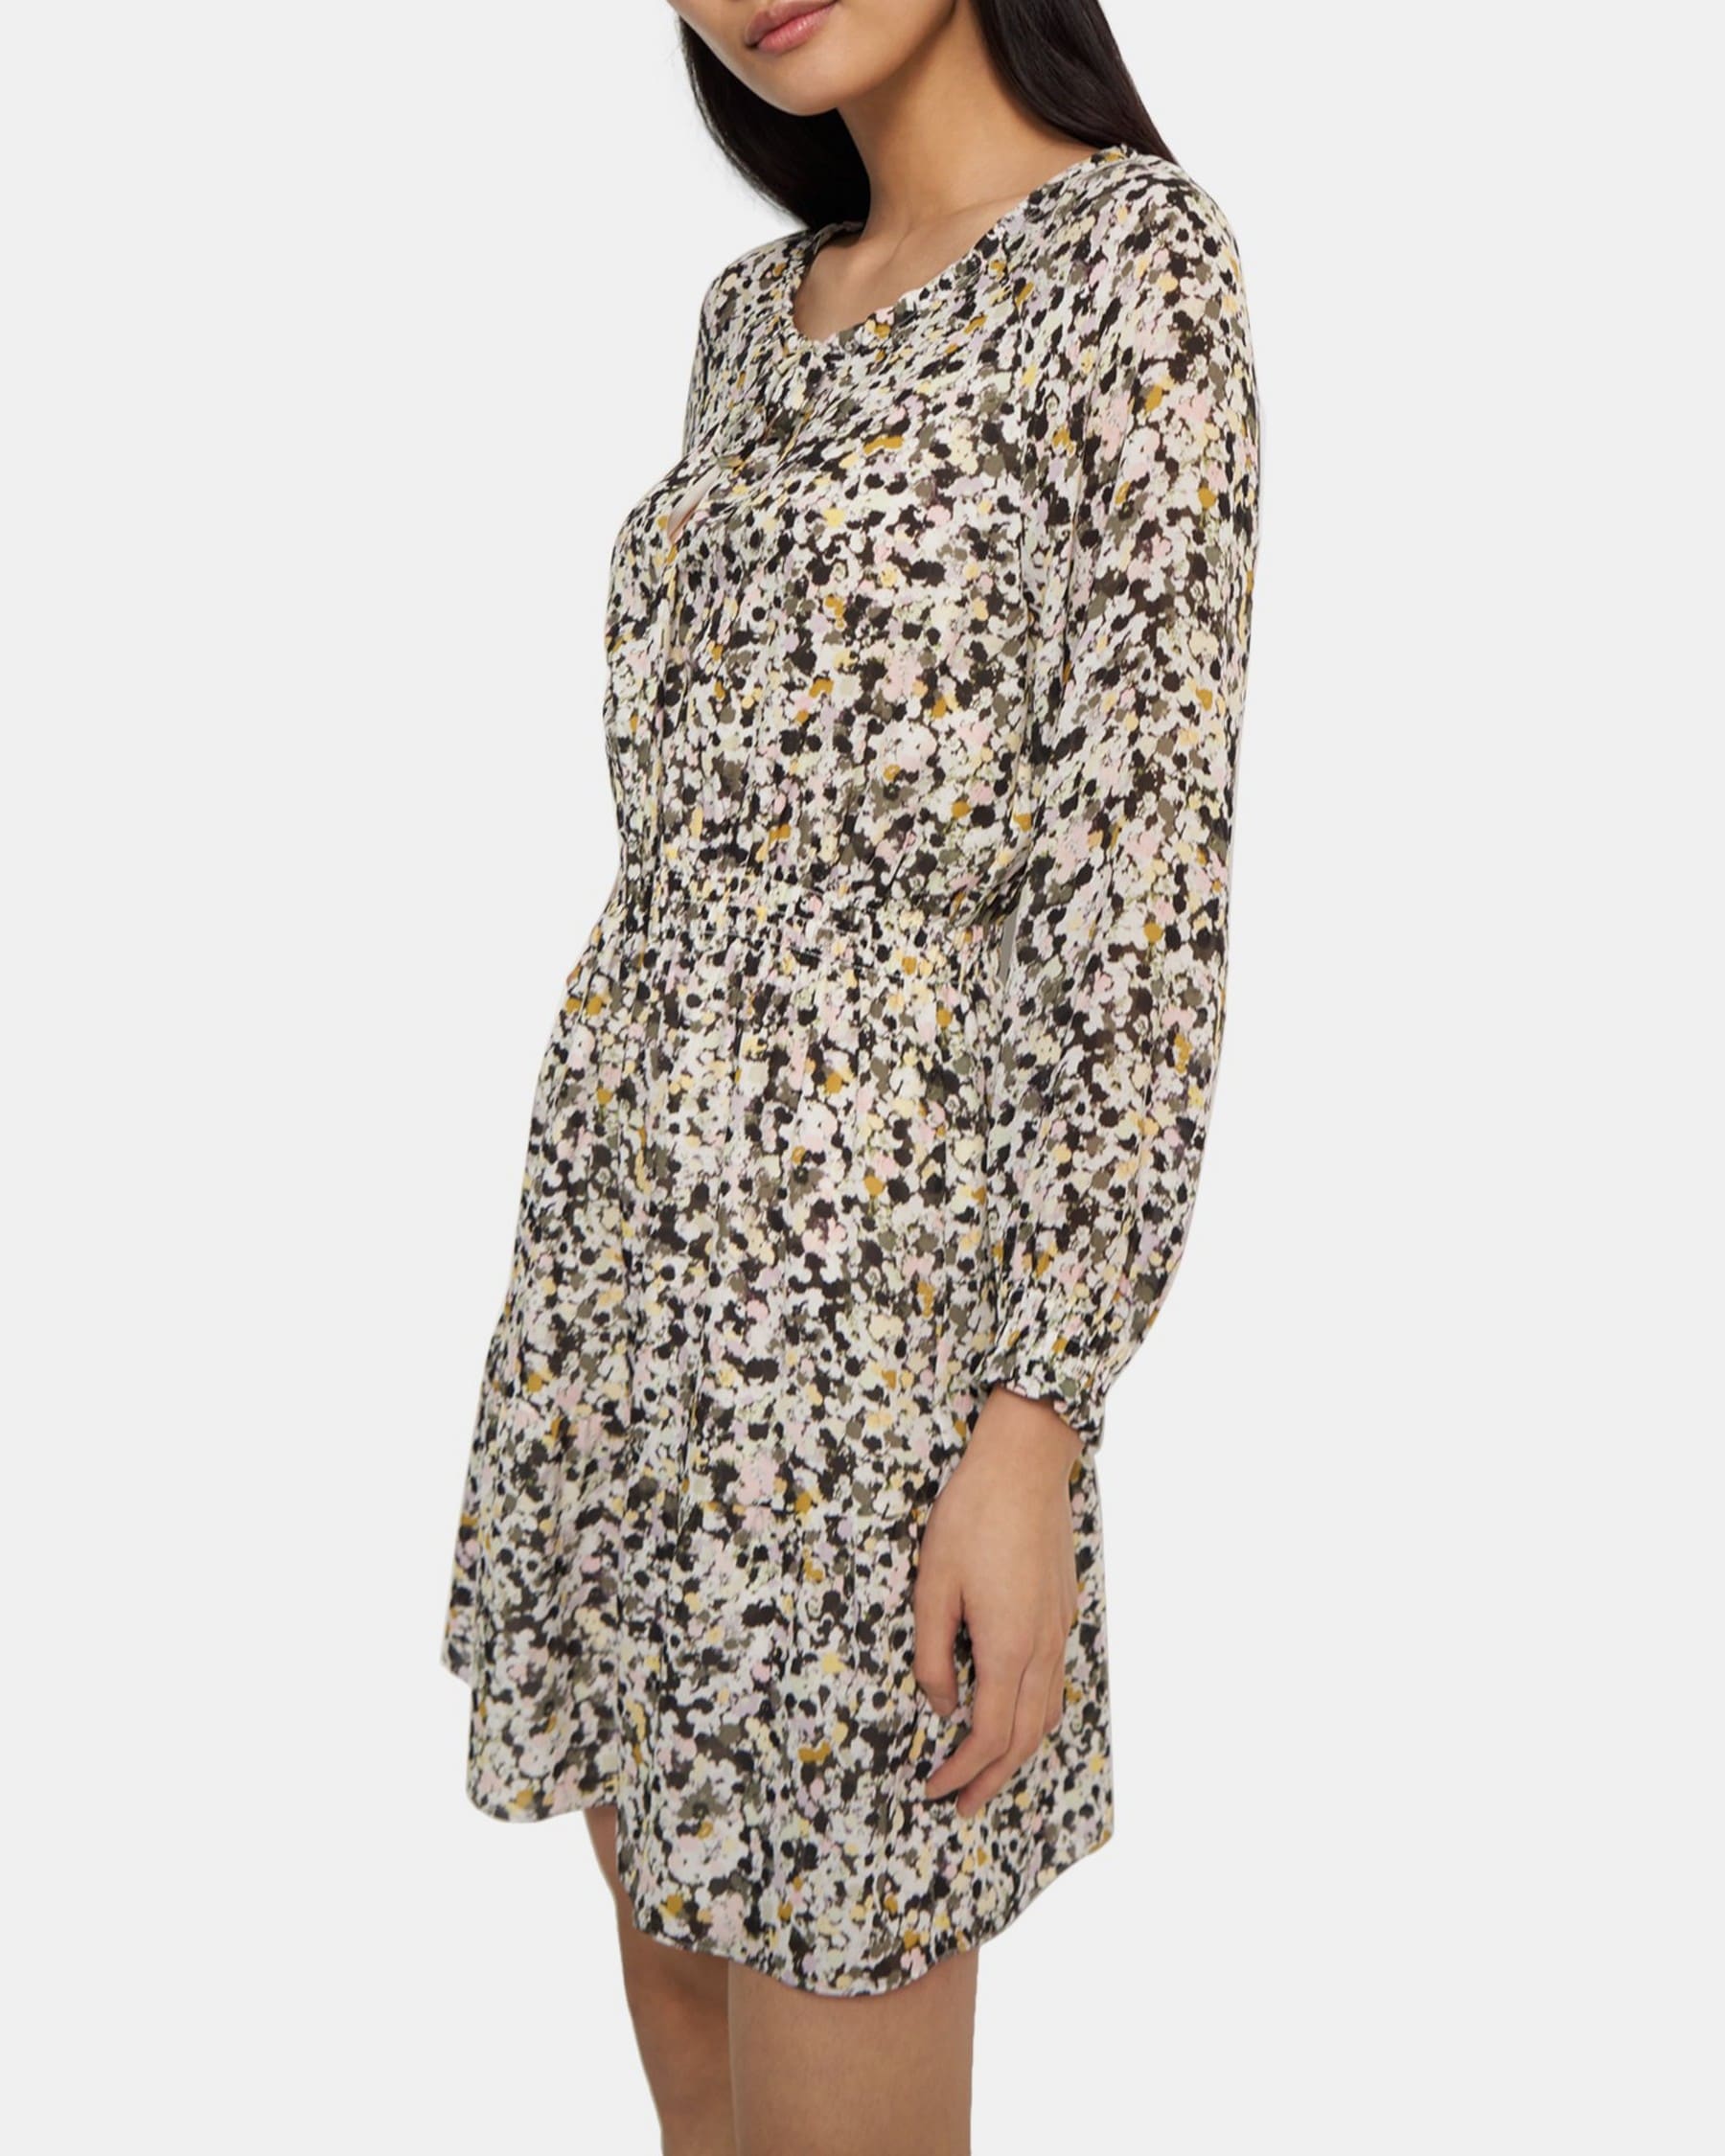 Gathered Shirt Dress in Floral Silk Crepe